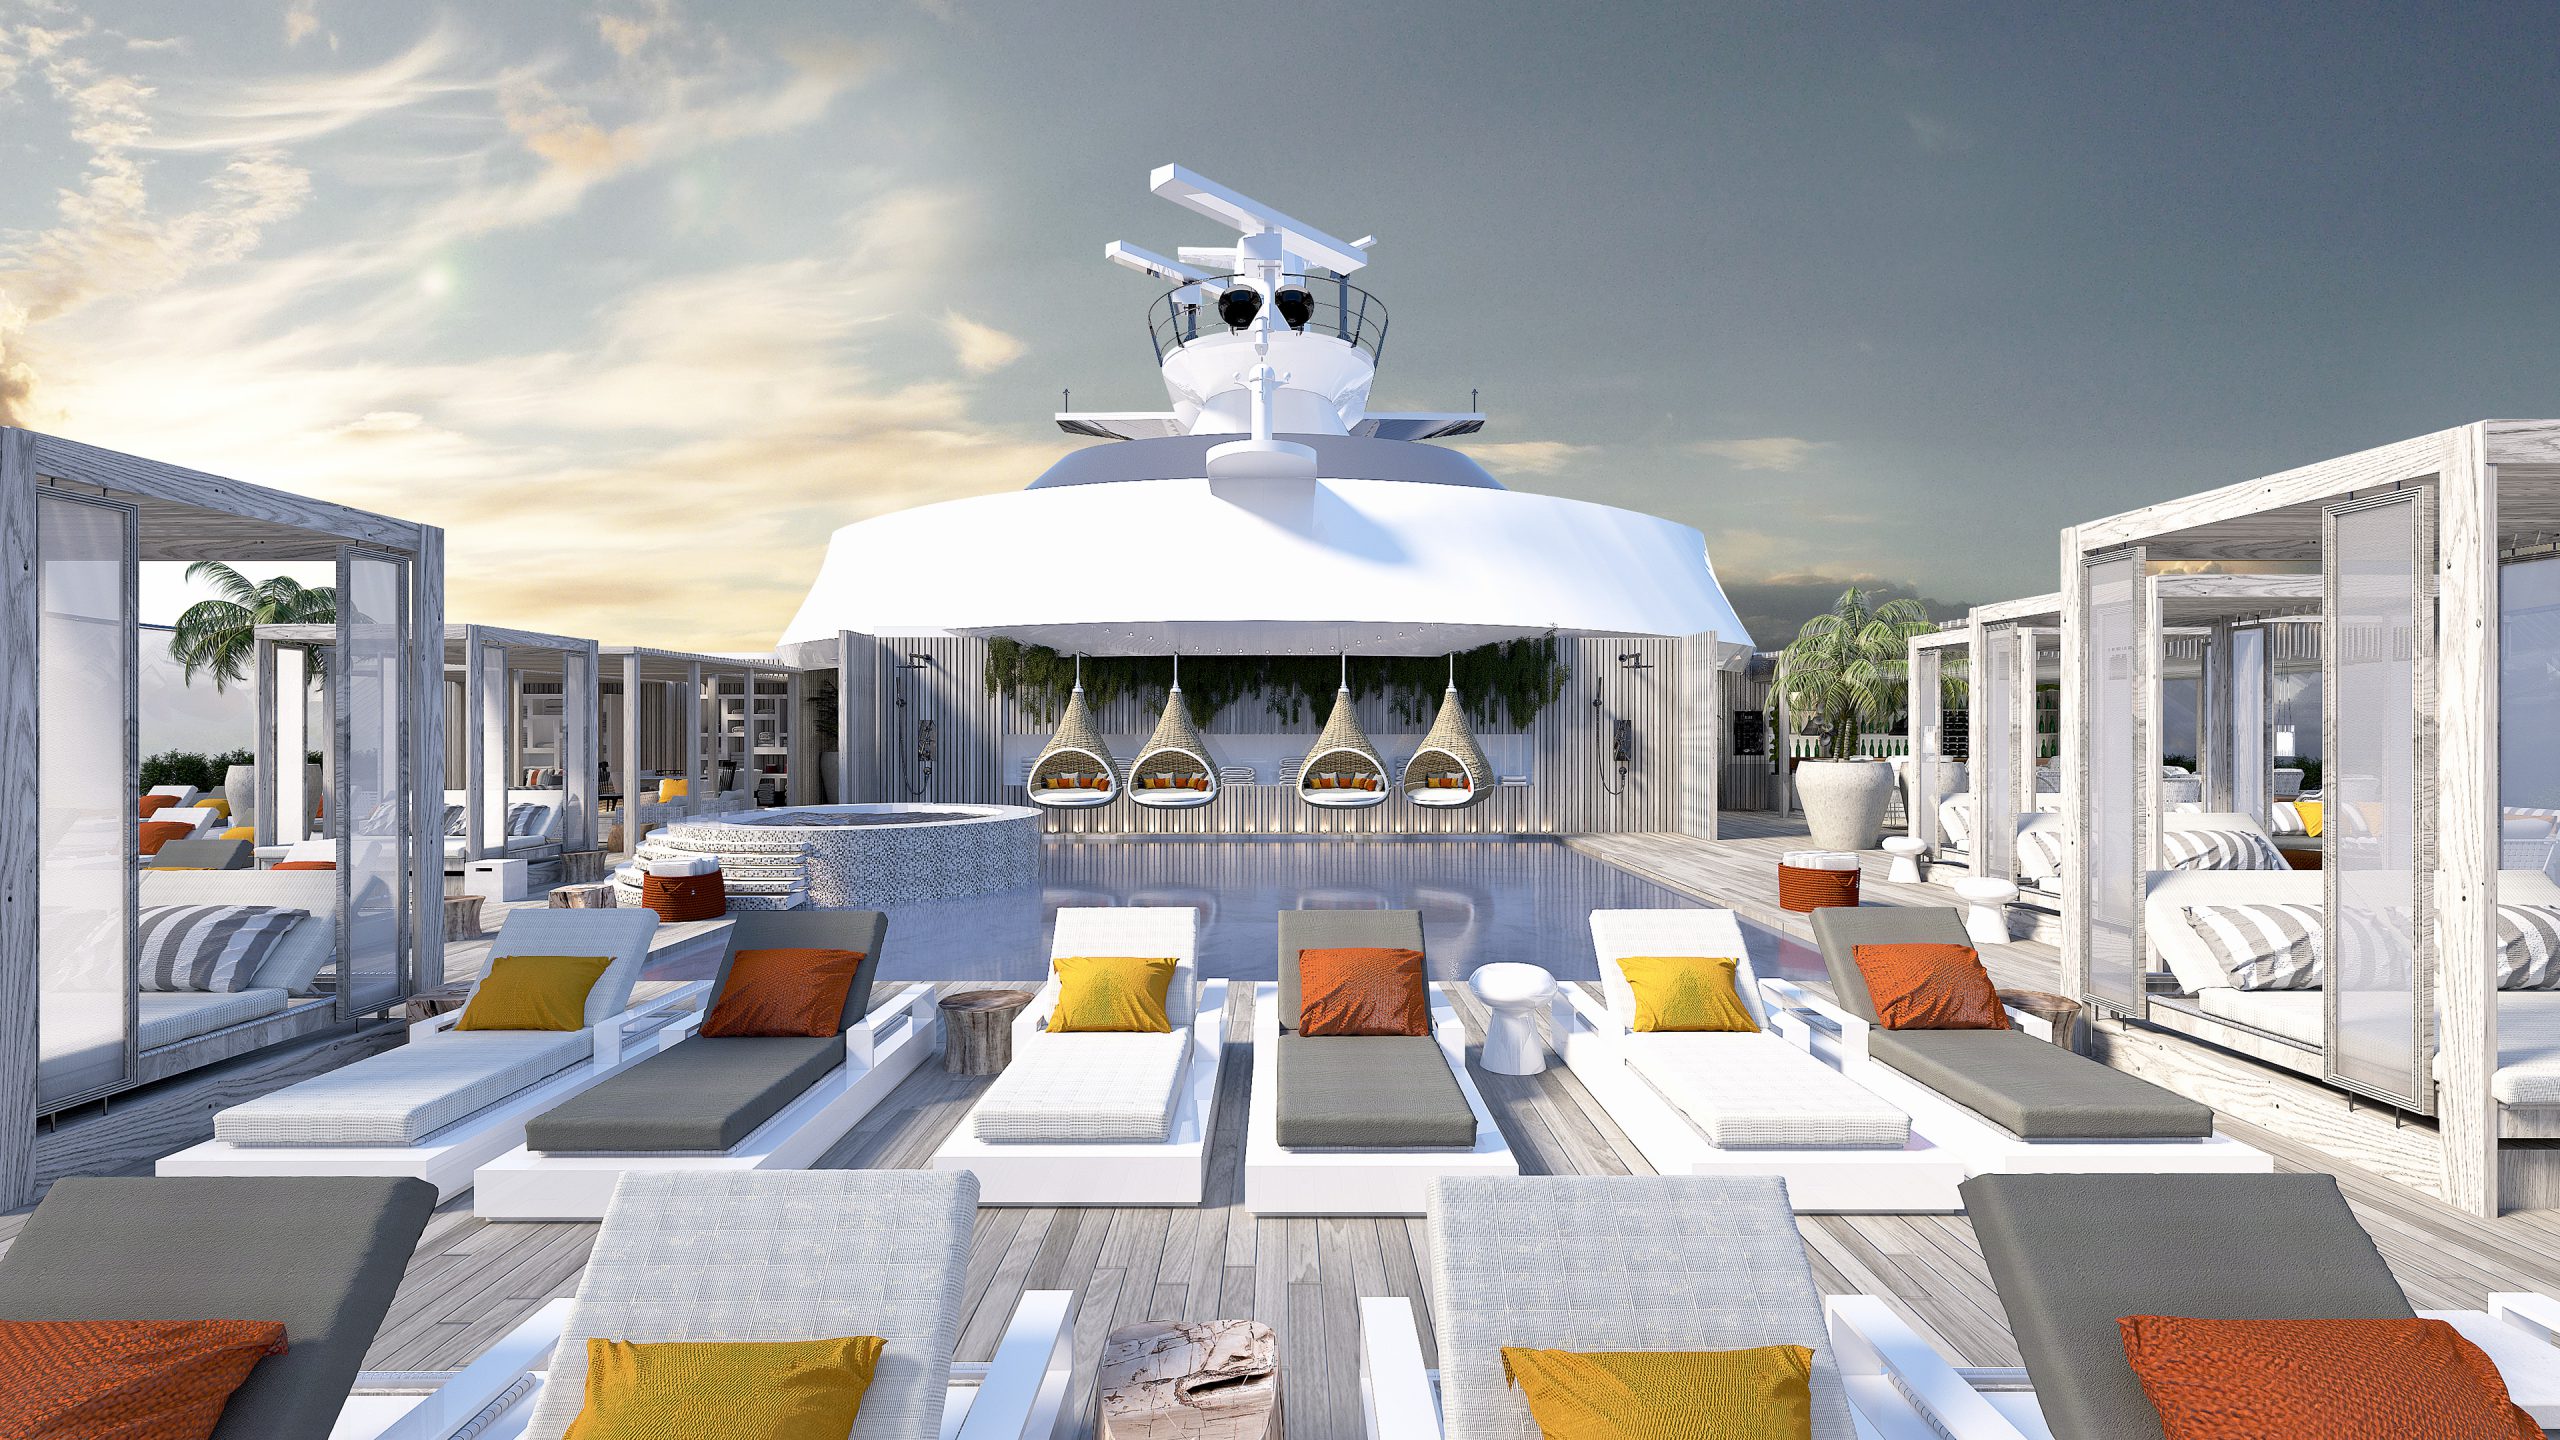 Celebrity Cruises reveals details of its cool new ship, the Celebrity Edge